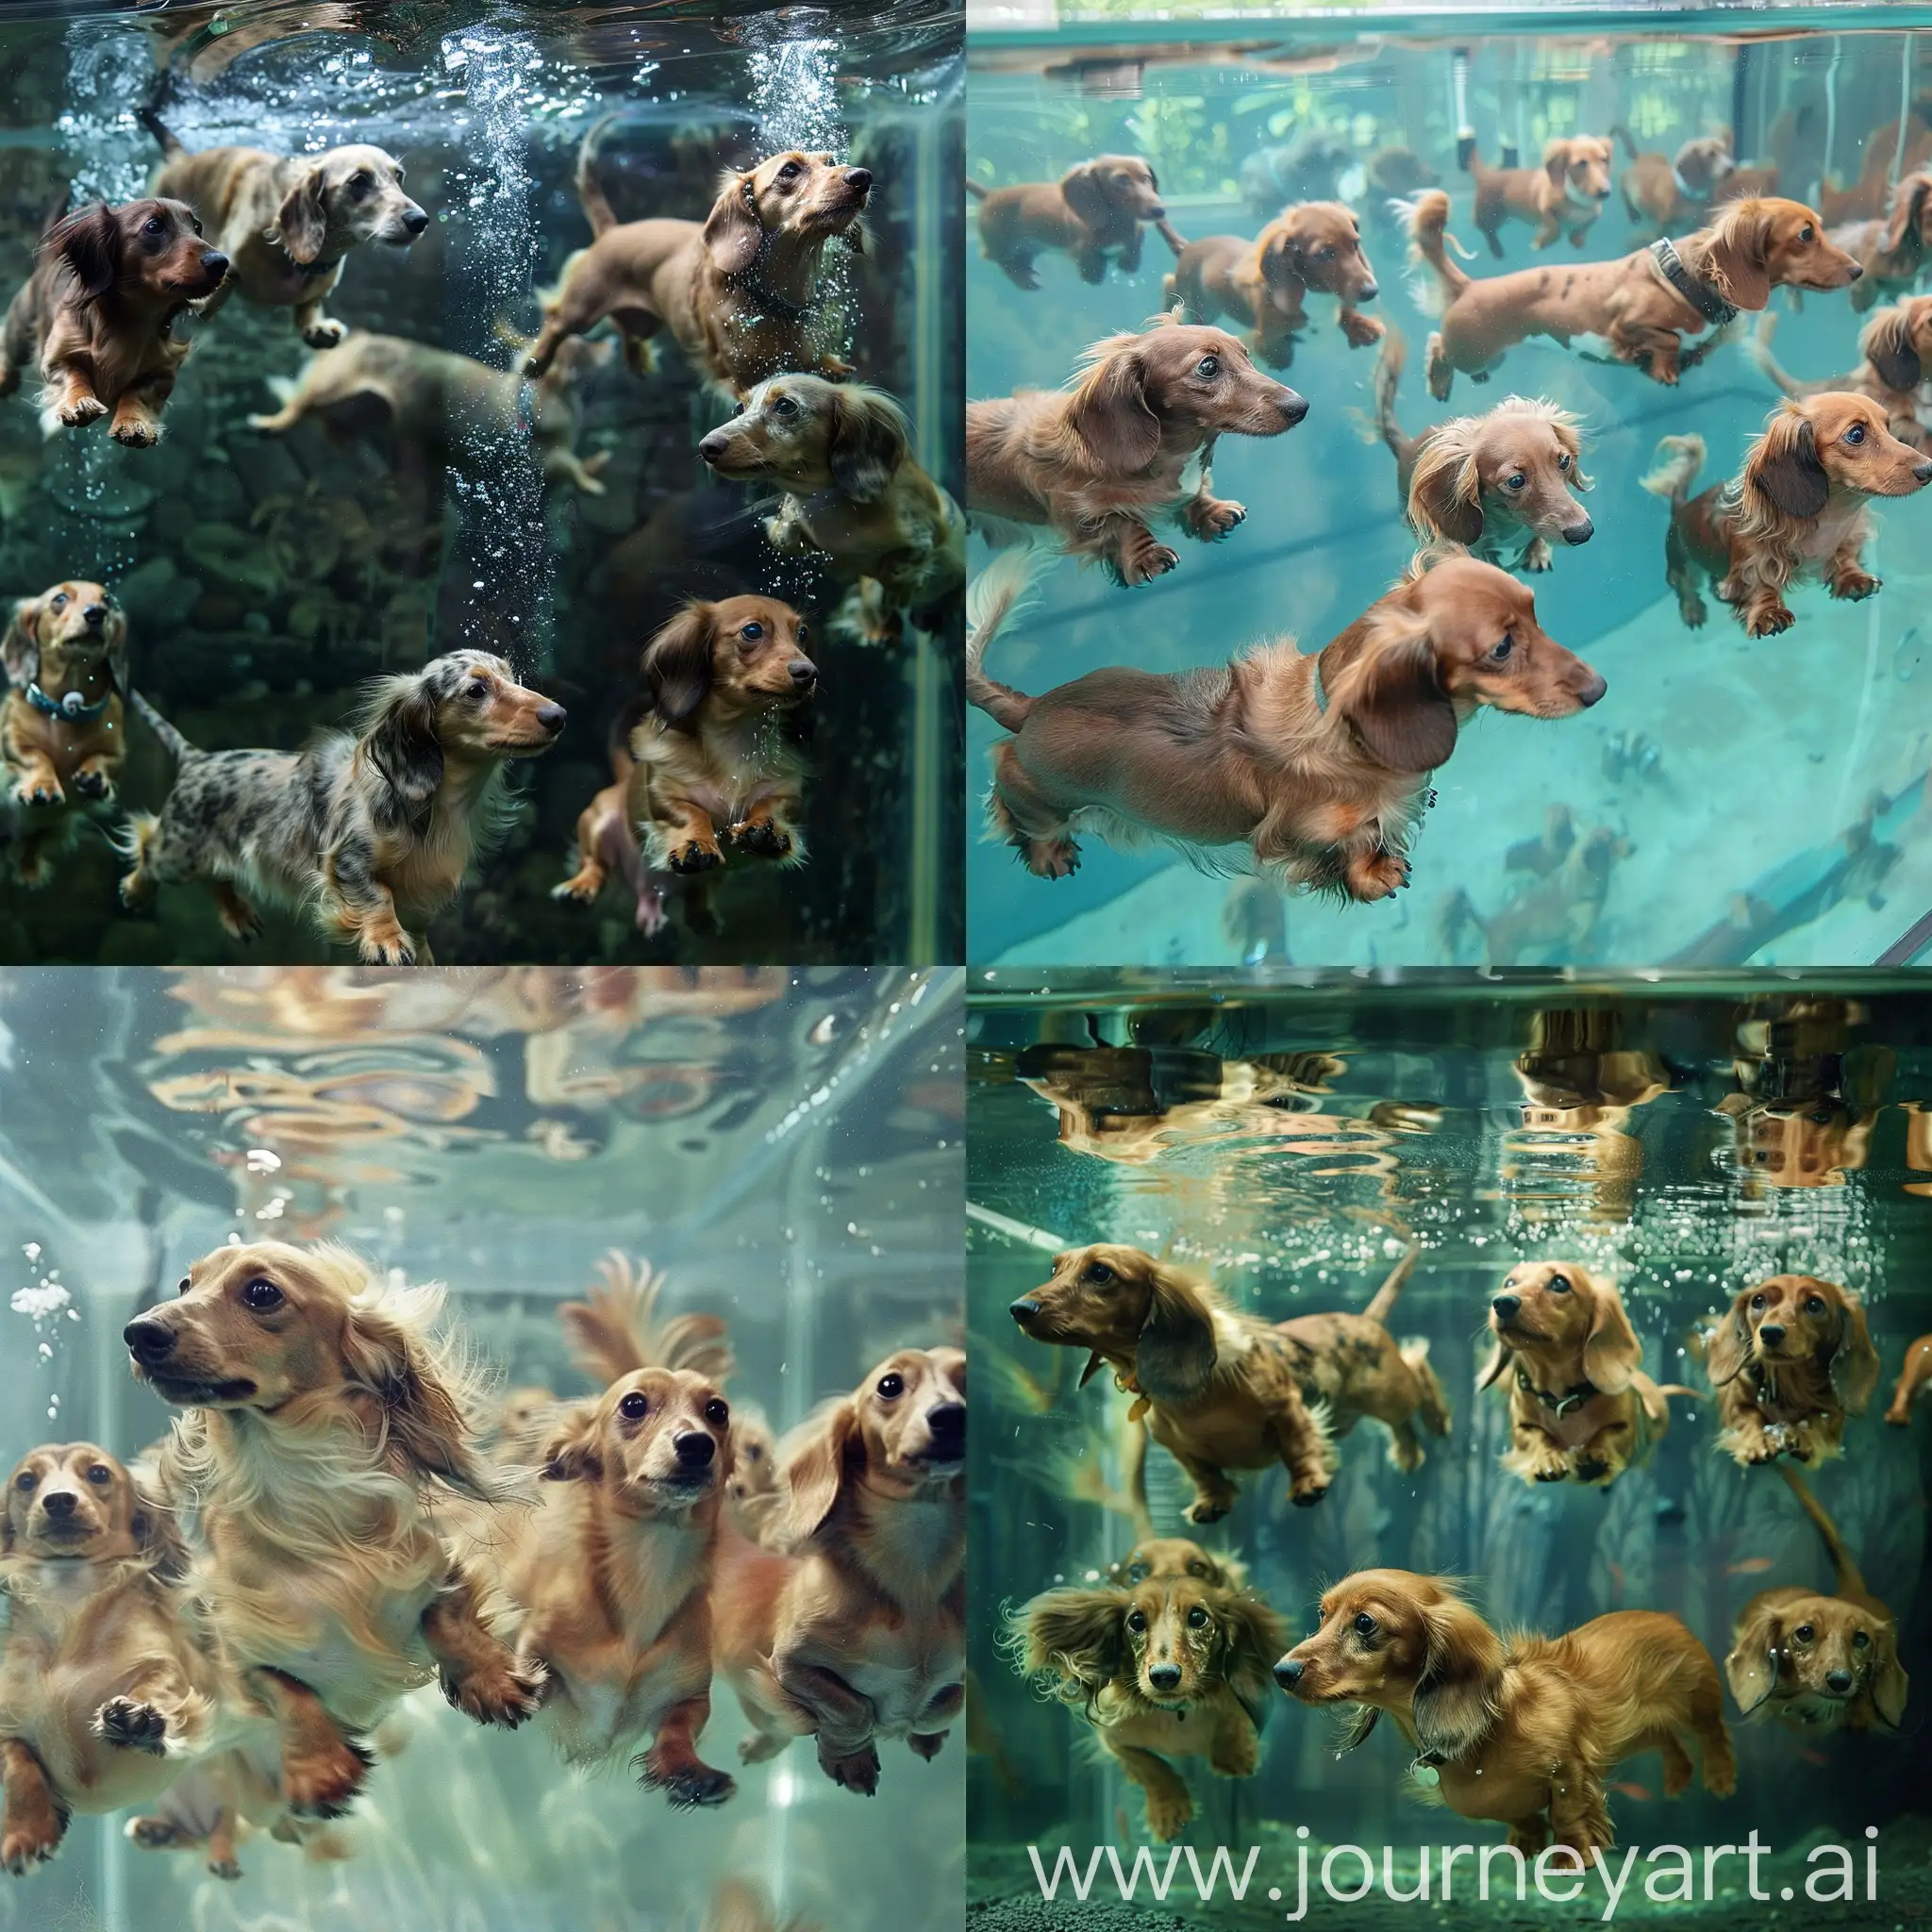 Long-Haired-Dachshunds-Swimming-in-Glass-Aquarium-Playful-Underwater-Canine-Scene